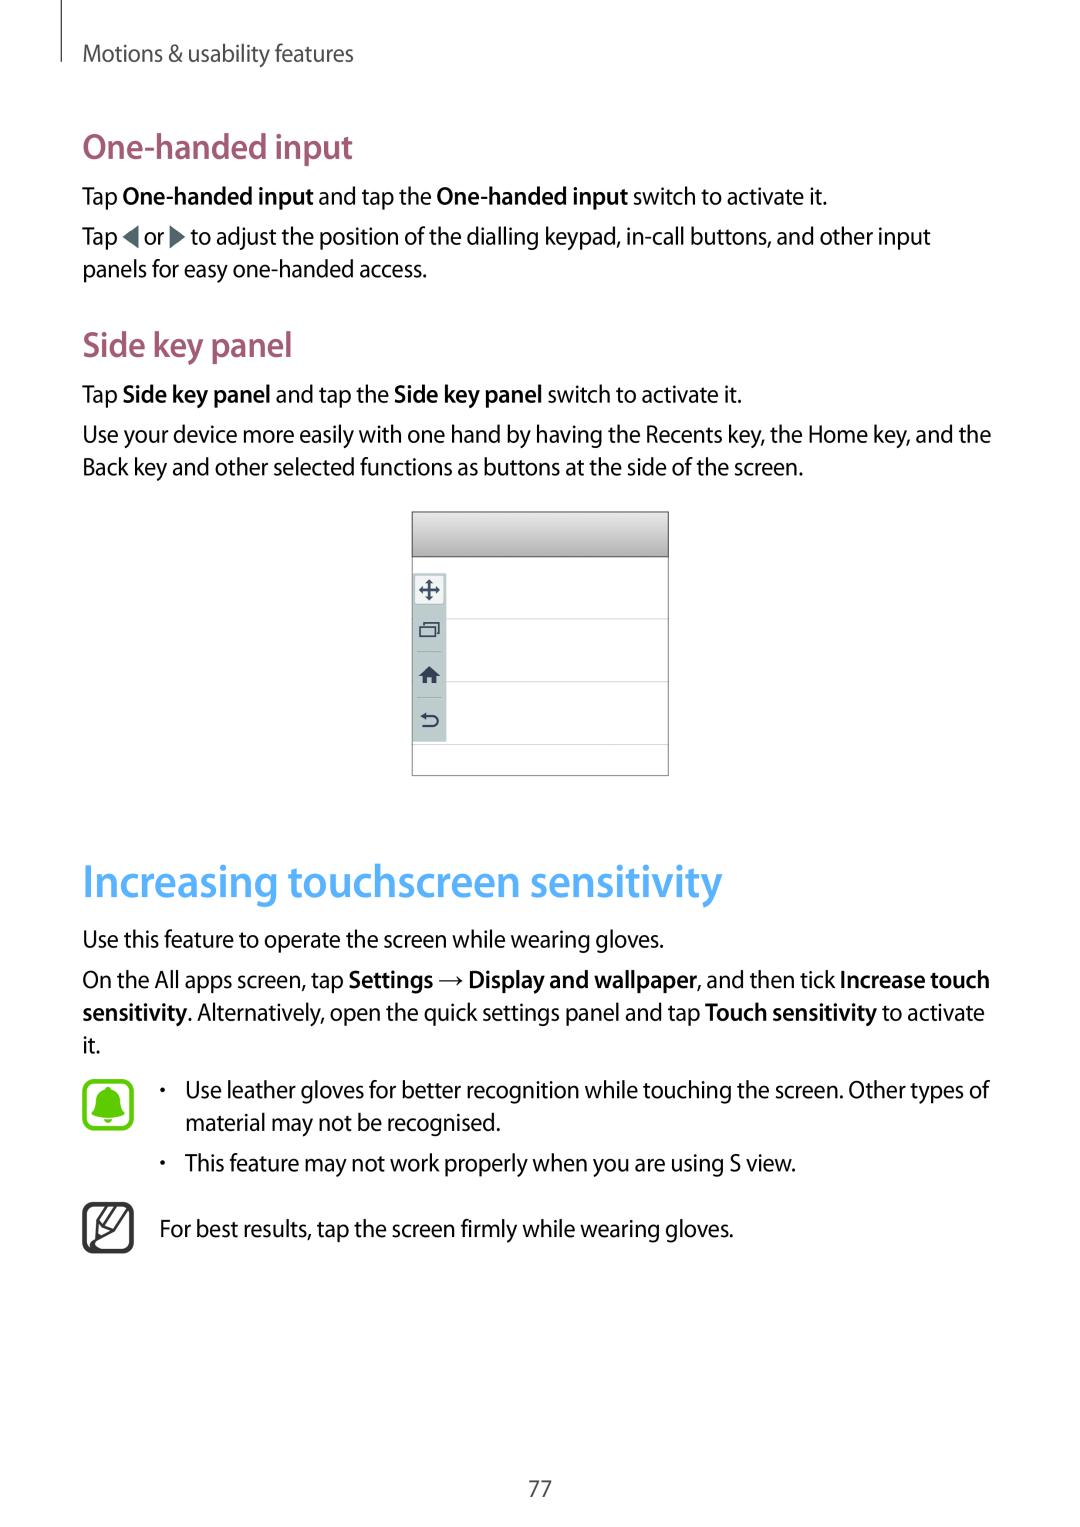 Samsung SM-N915FZKYITV Increasing touchscreen sensitivity, One-handed input, Side key panel, Motions & usability features 